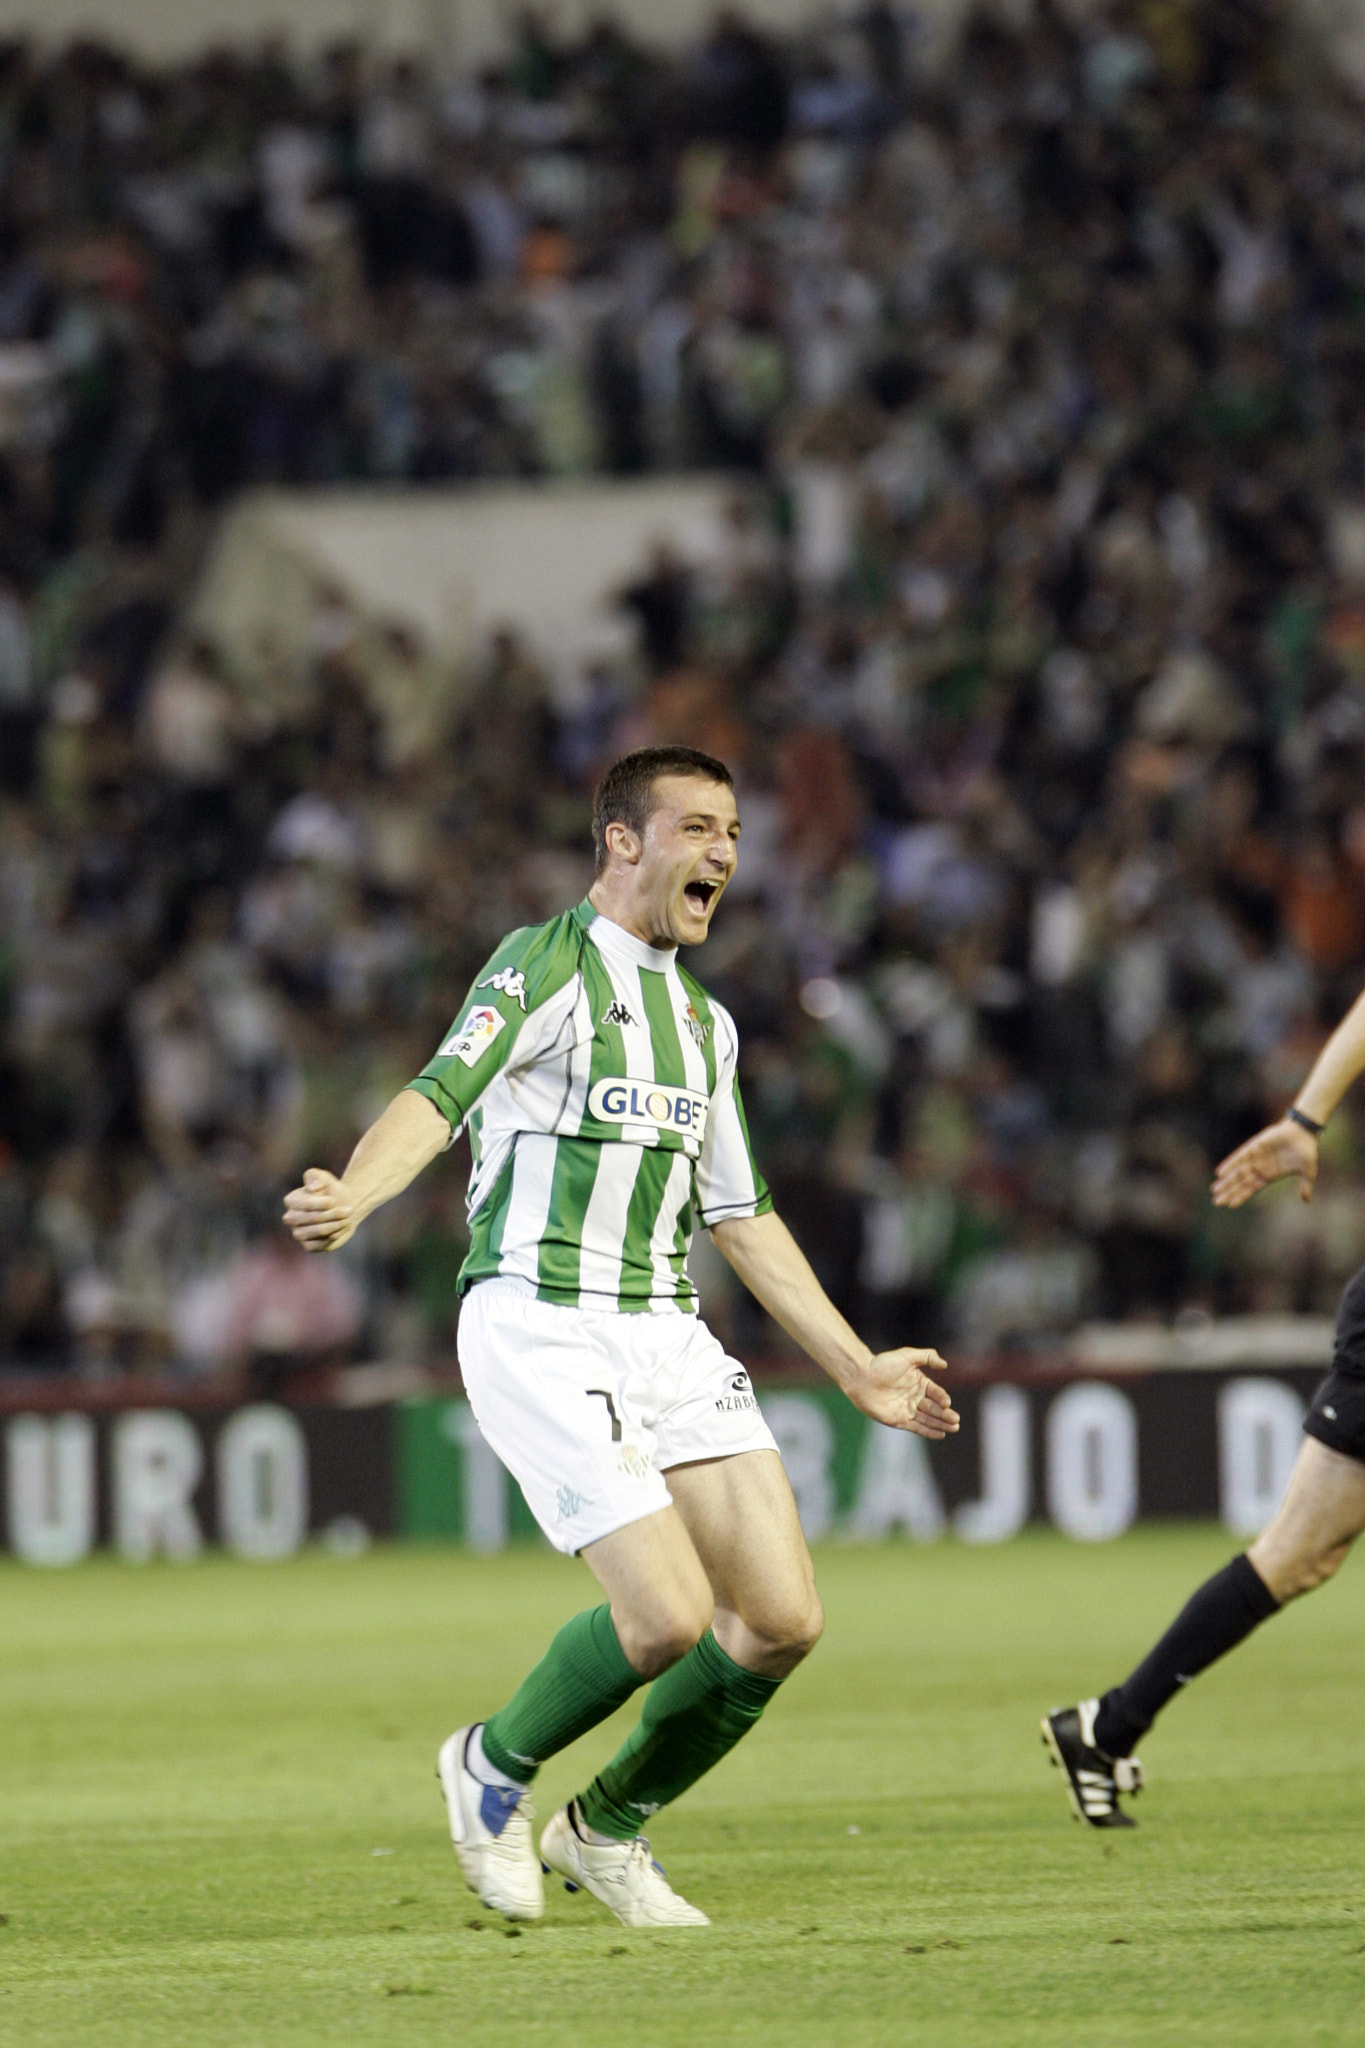 Varela celebrating a goal. Taken during the local derby between Real Betis Balompie and Sevilla FC w